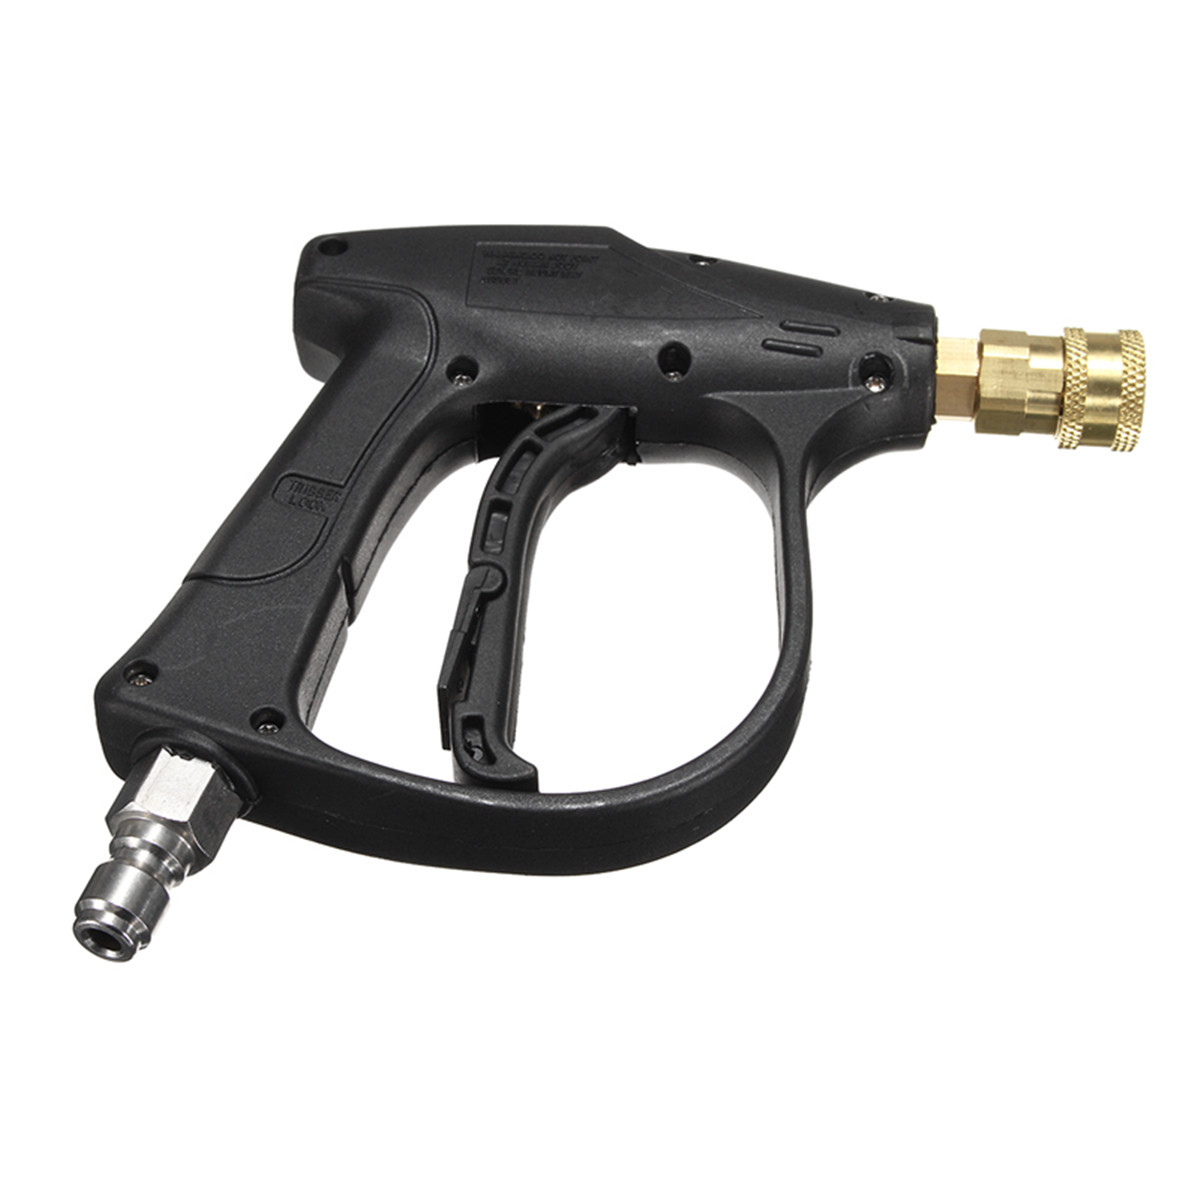 3000PSI-High-Pressure-Water-Gun-Adapter-With-5pcs-Nozzles-for-High-Pressure-Water-Cleaner-1130889-8